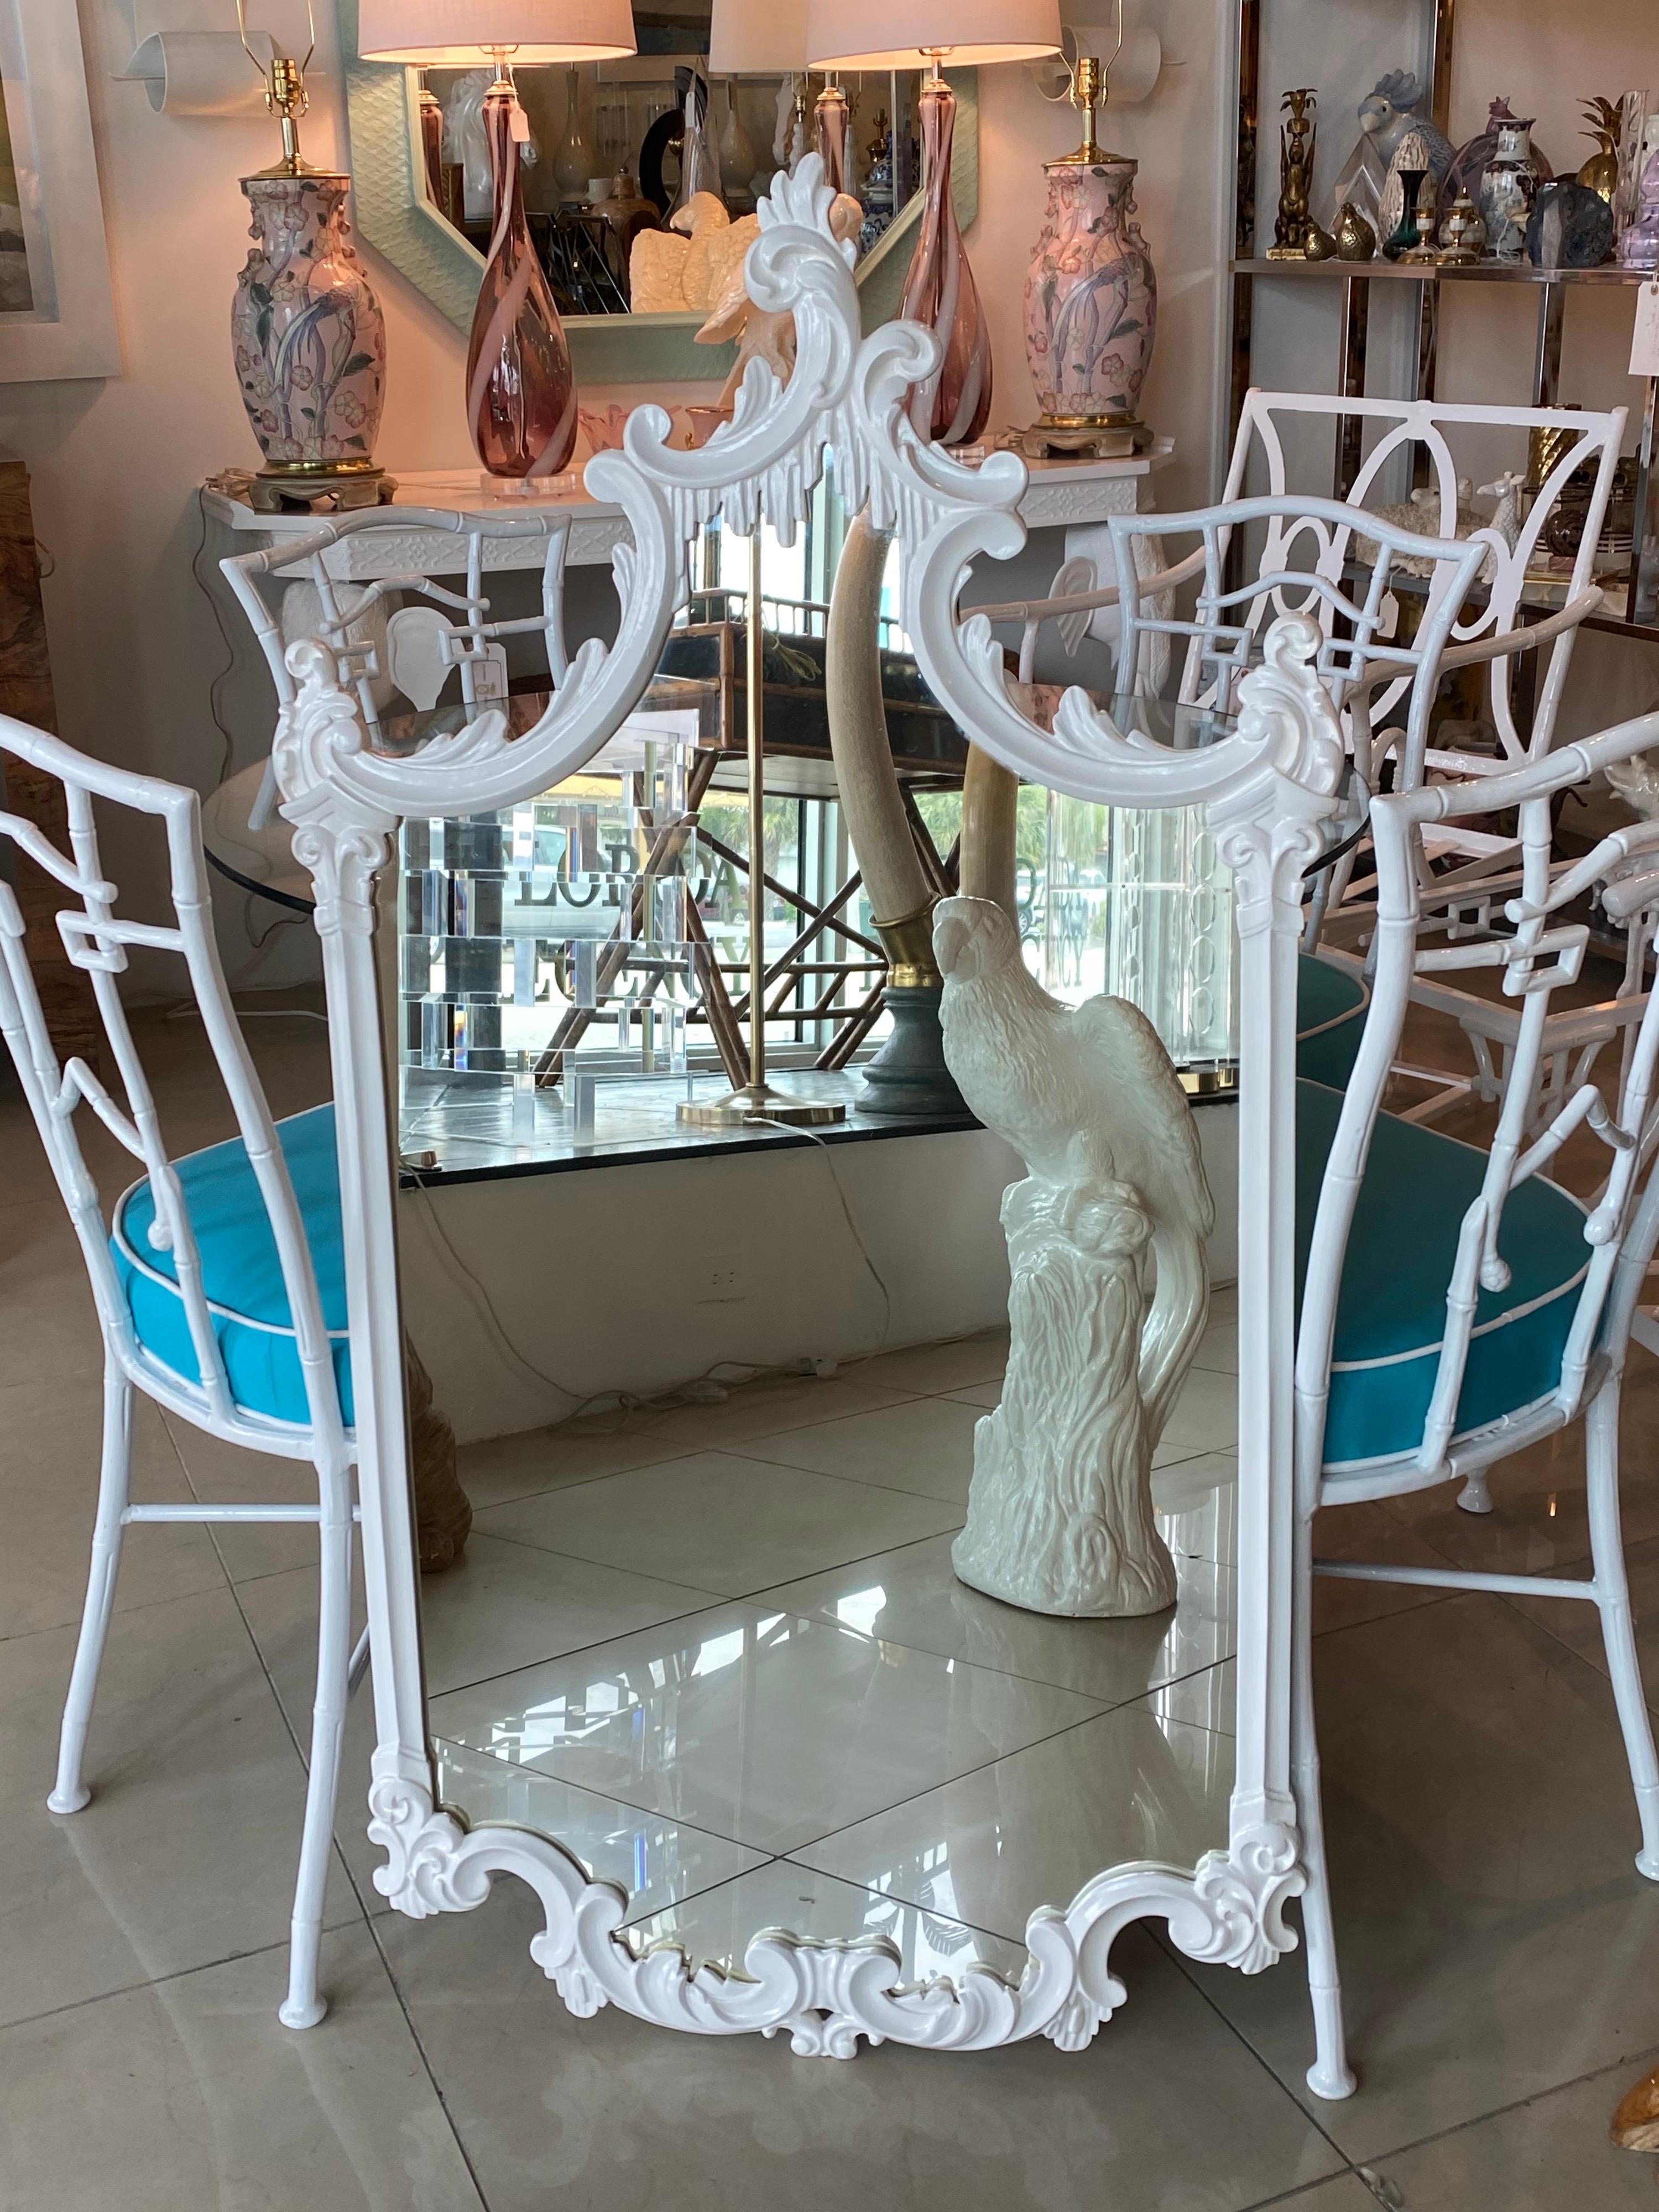 Lovely vintage wood pagoda wall mirror. Lovely details that drip down on the top pagoda portion. Newly lacquered in a fresh, clean white. Comes ready to hang.